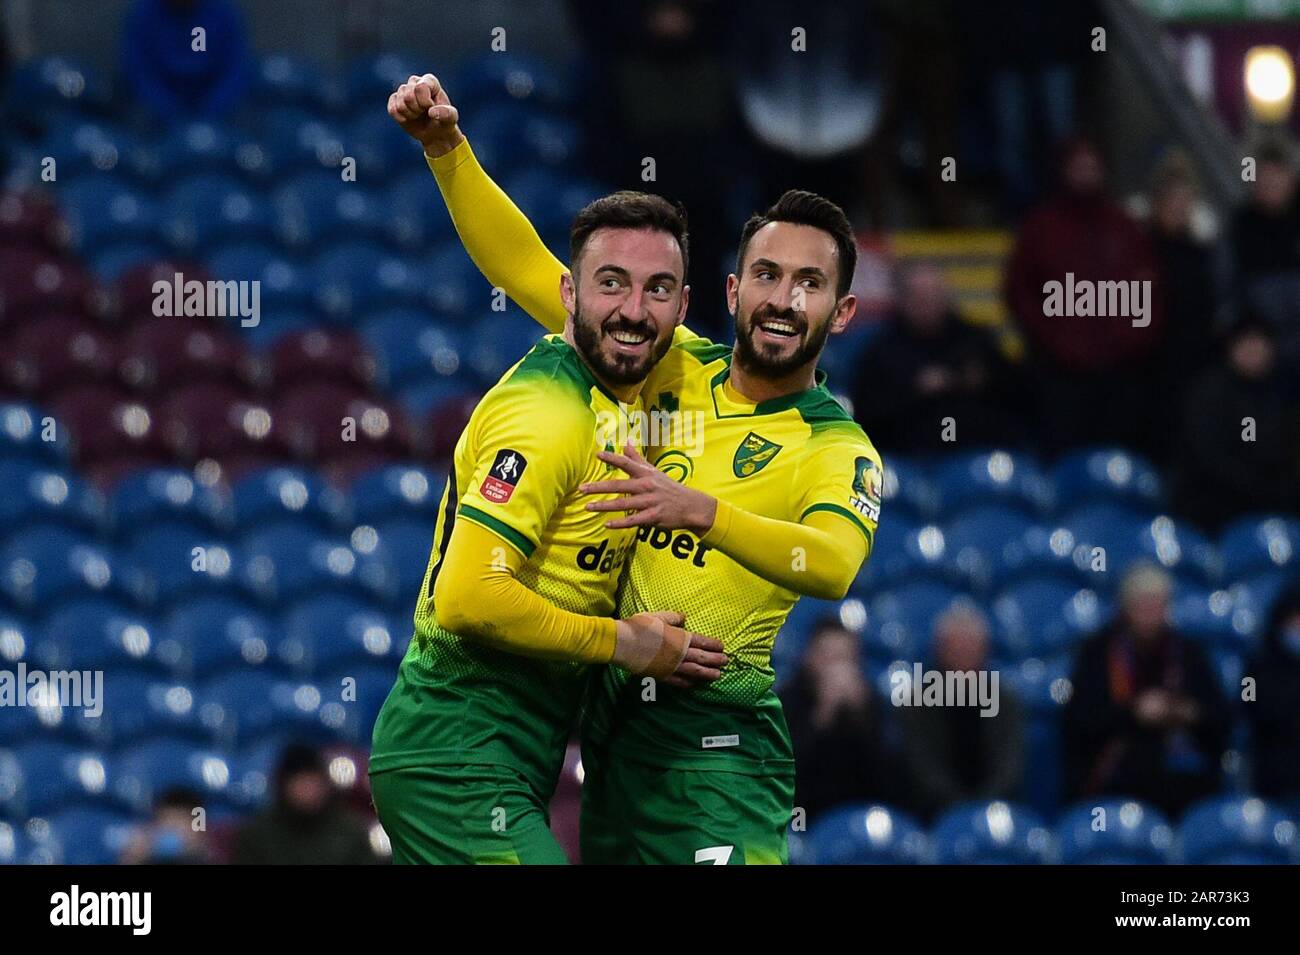 25th January 2020, Turf Moor, Burnley, England; Emirates FA Cup, Burnley v Norwich City : Josip Drmic (20) of Norwich City celebrates scoring his goal making it 0-2 with Lukas Rupp (7) of Norwich City Stock Photo